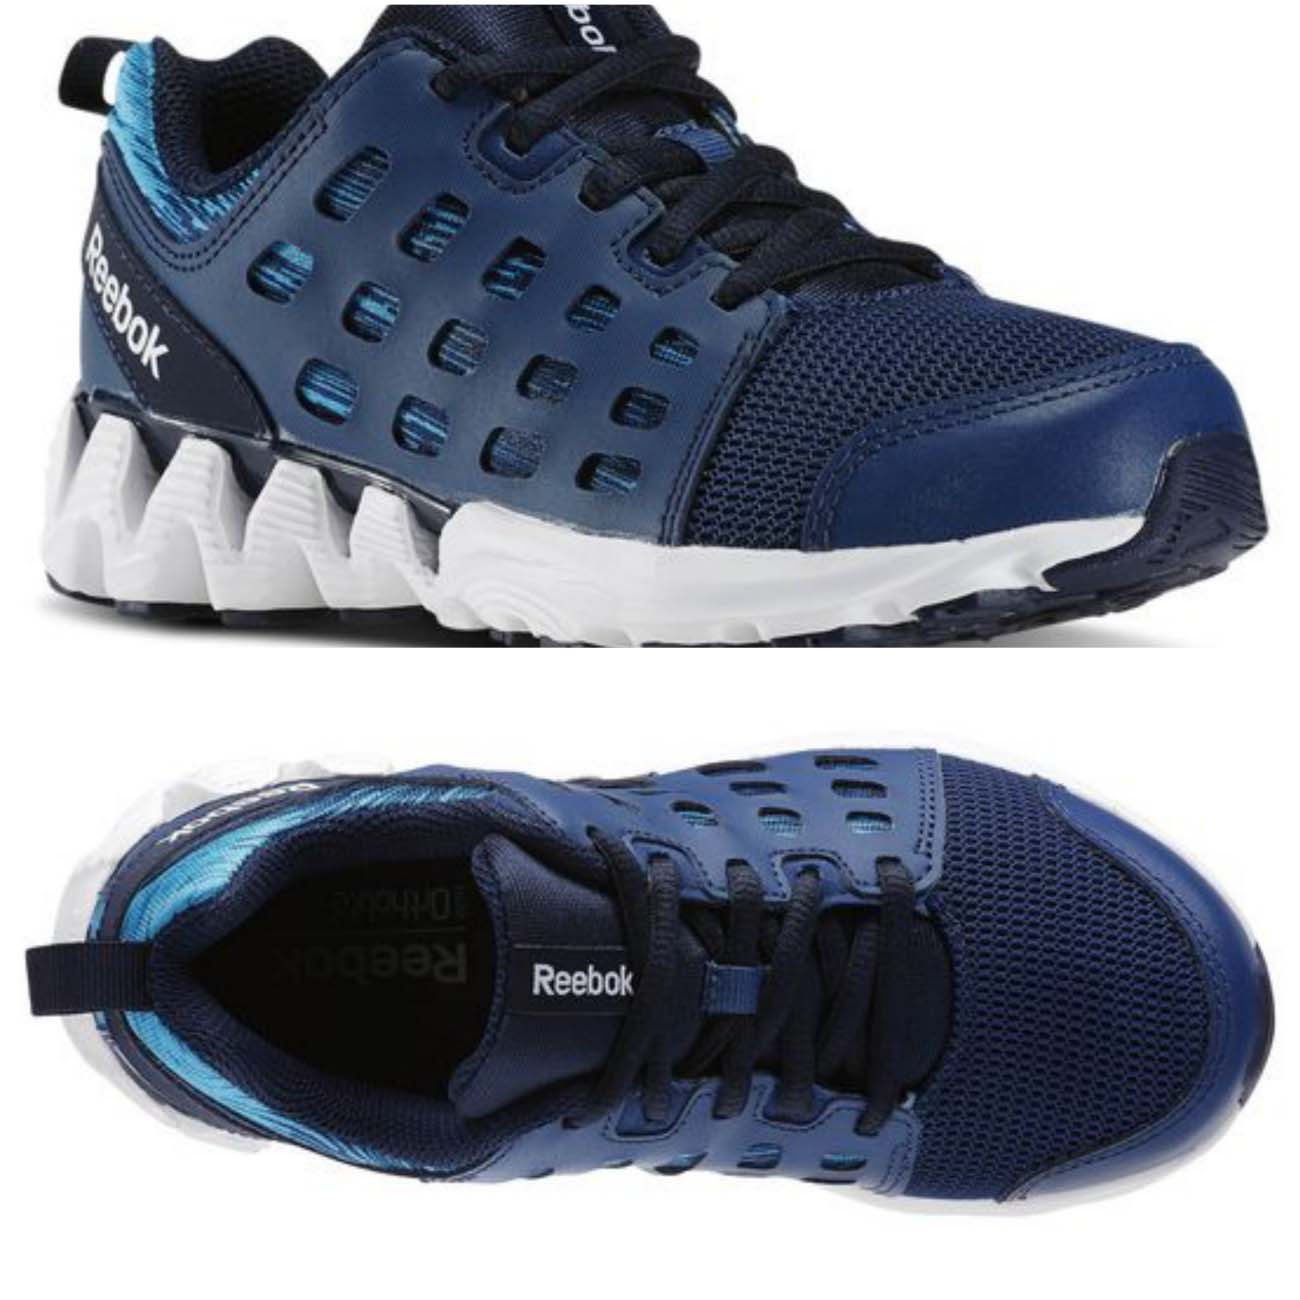 reebok latest shoes in india